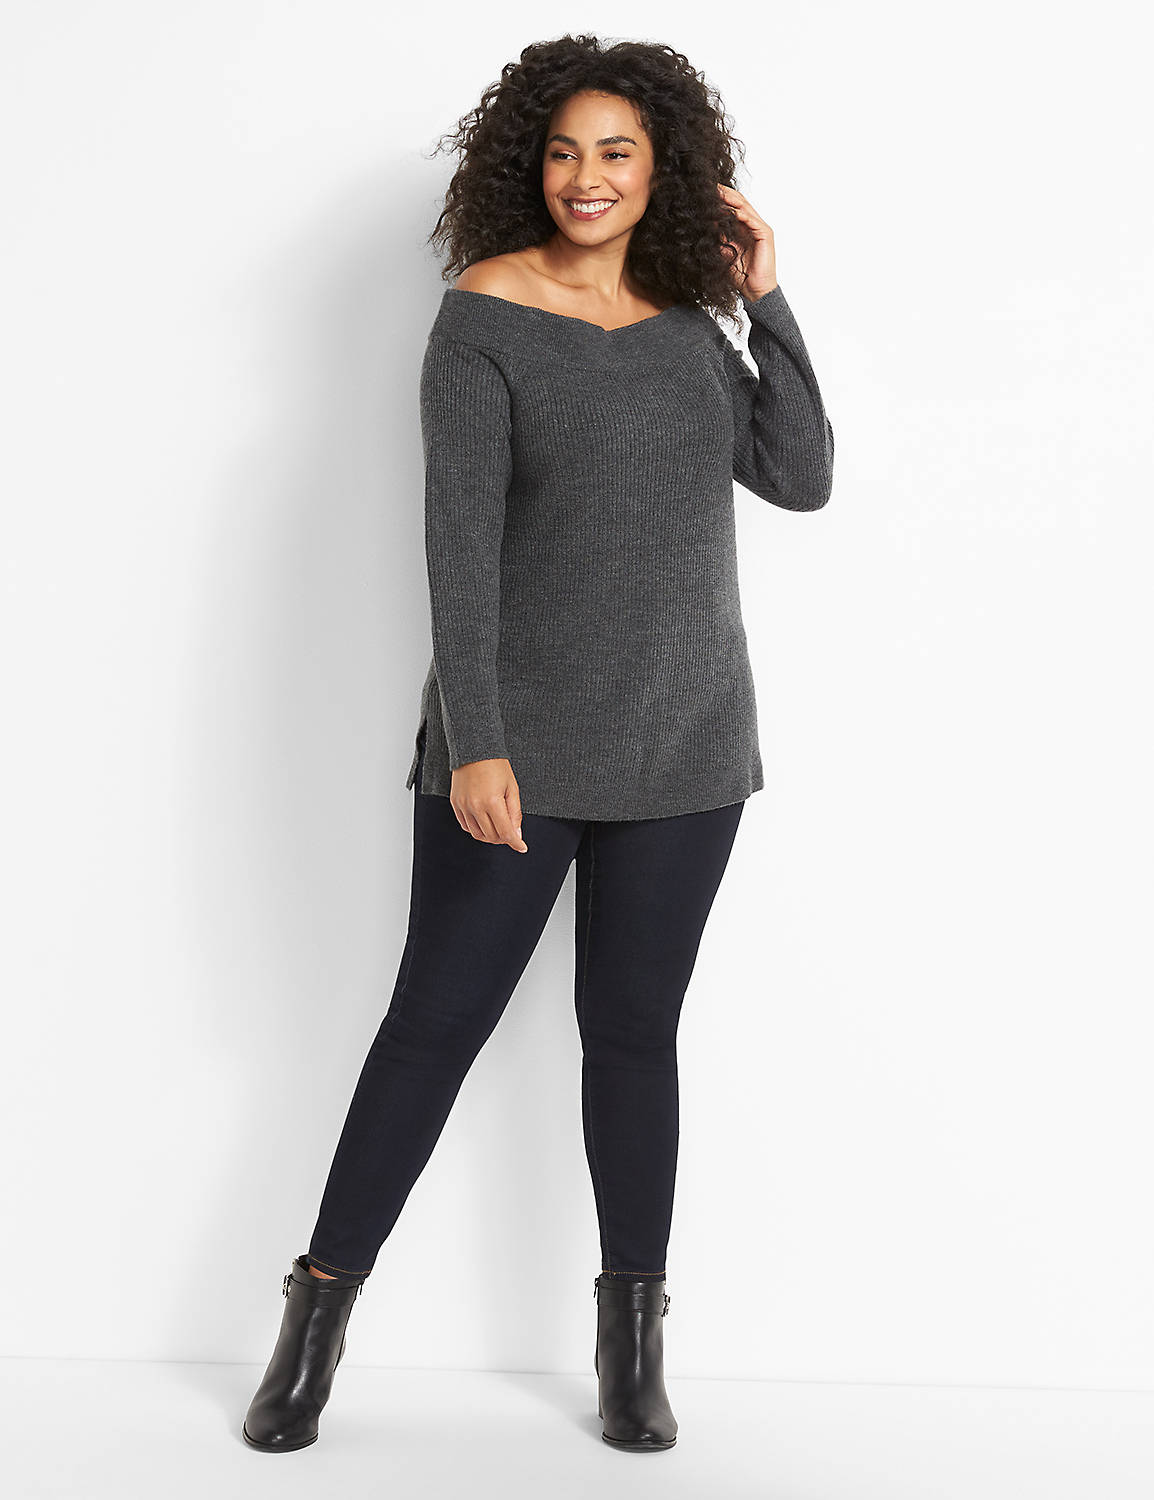 Off-The-Shoulder Sweater Product Image 3